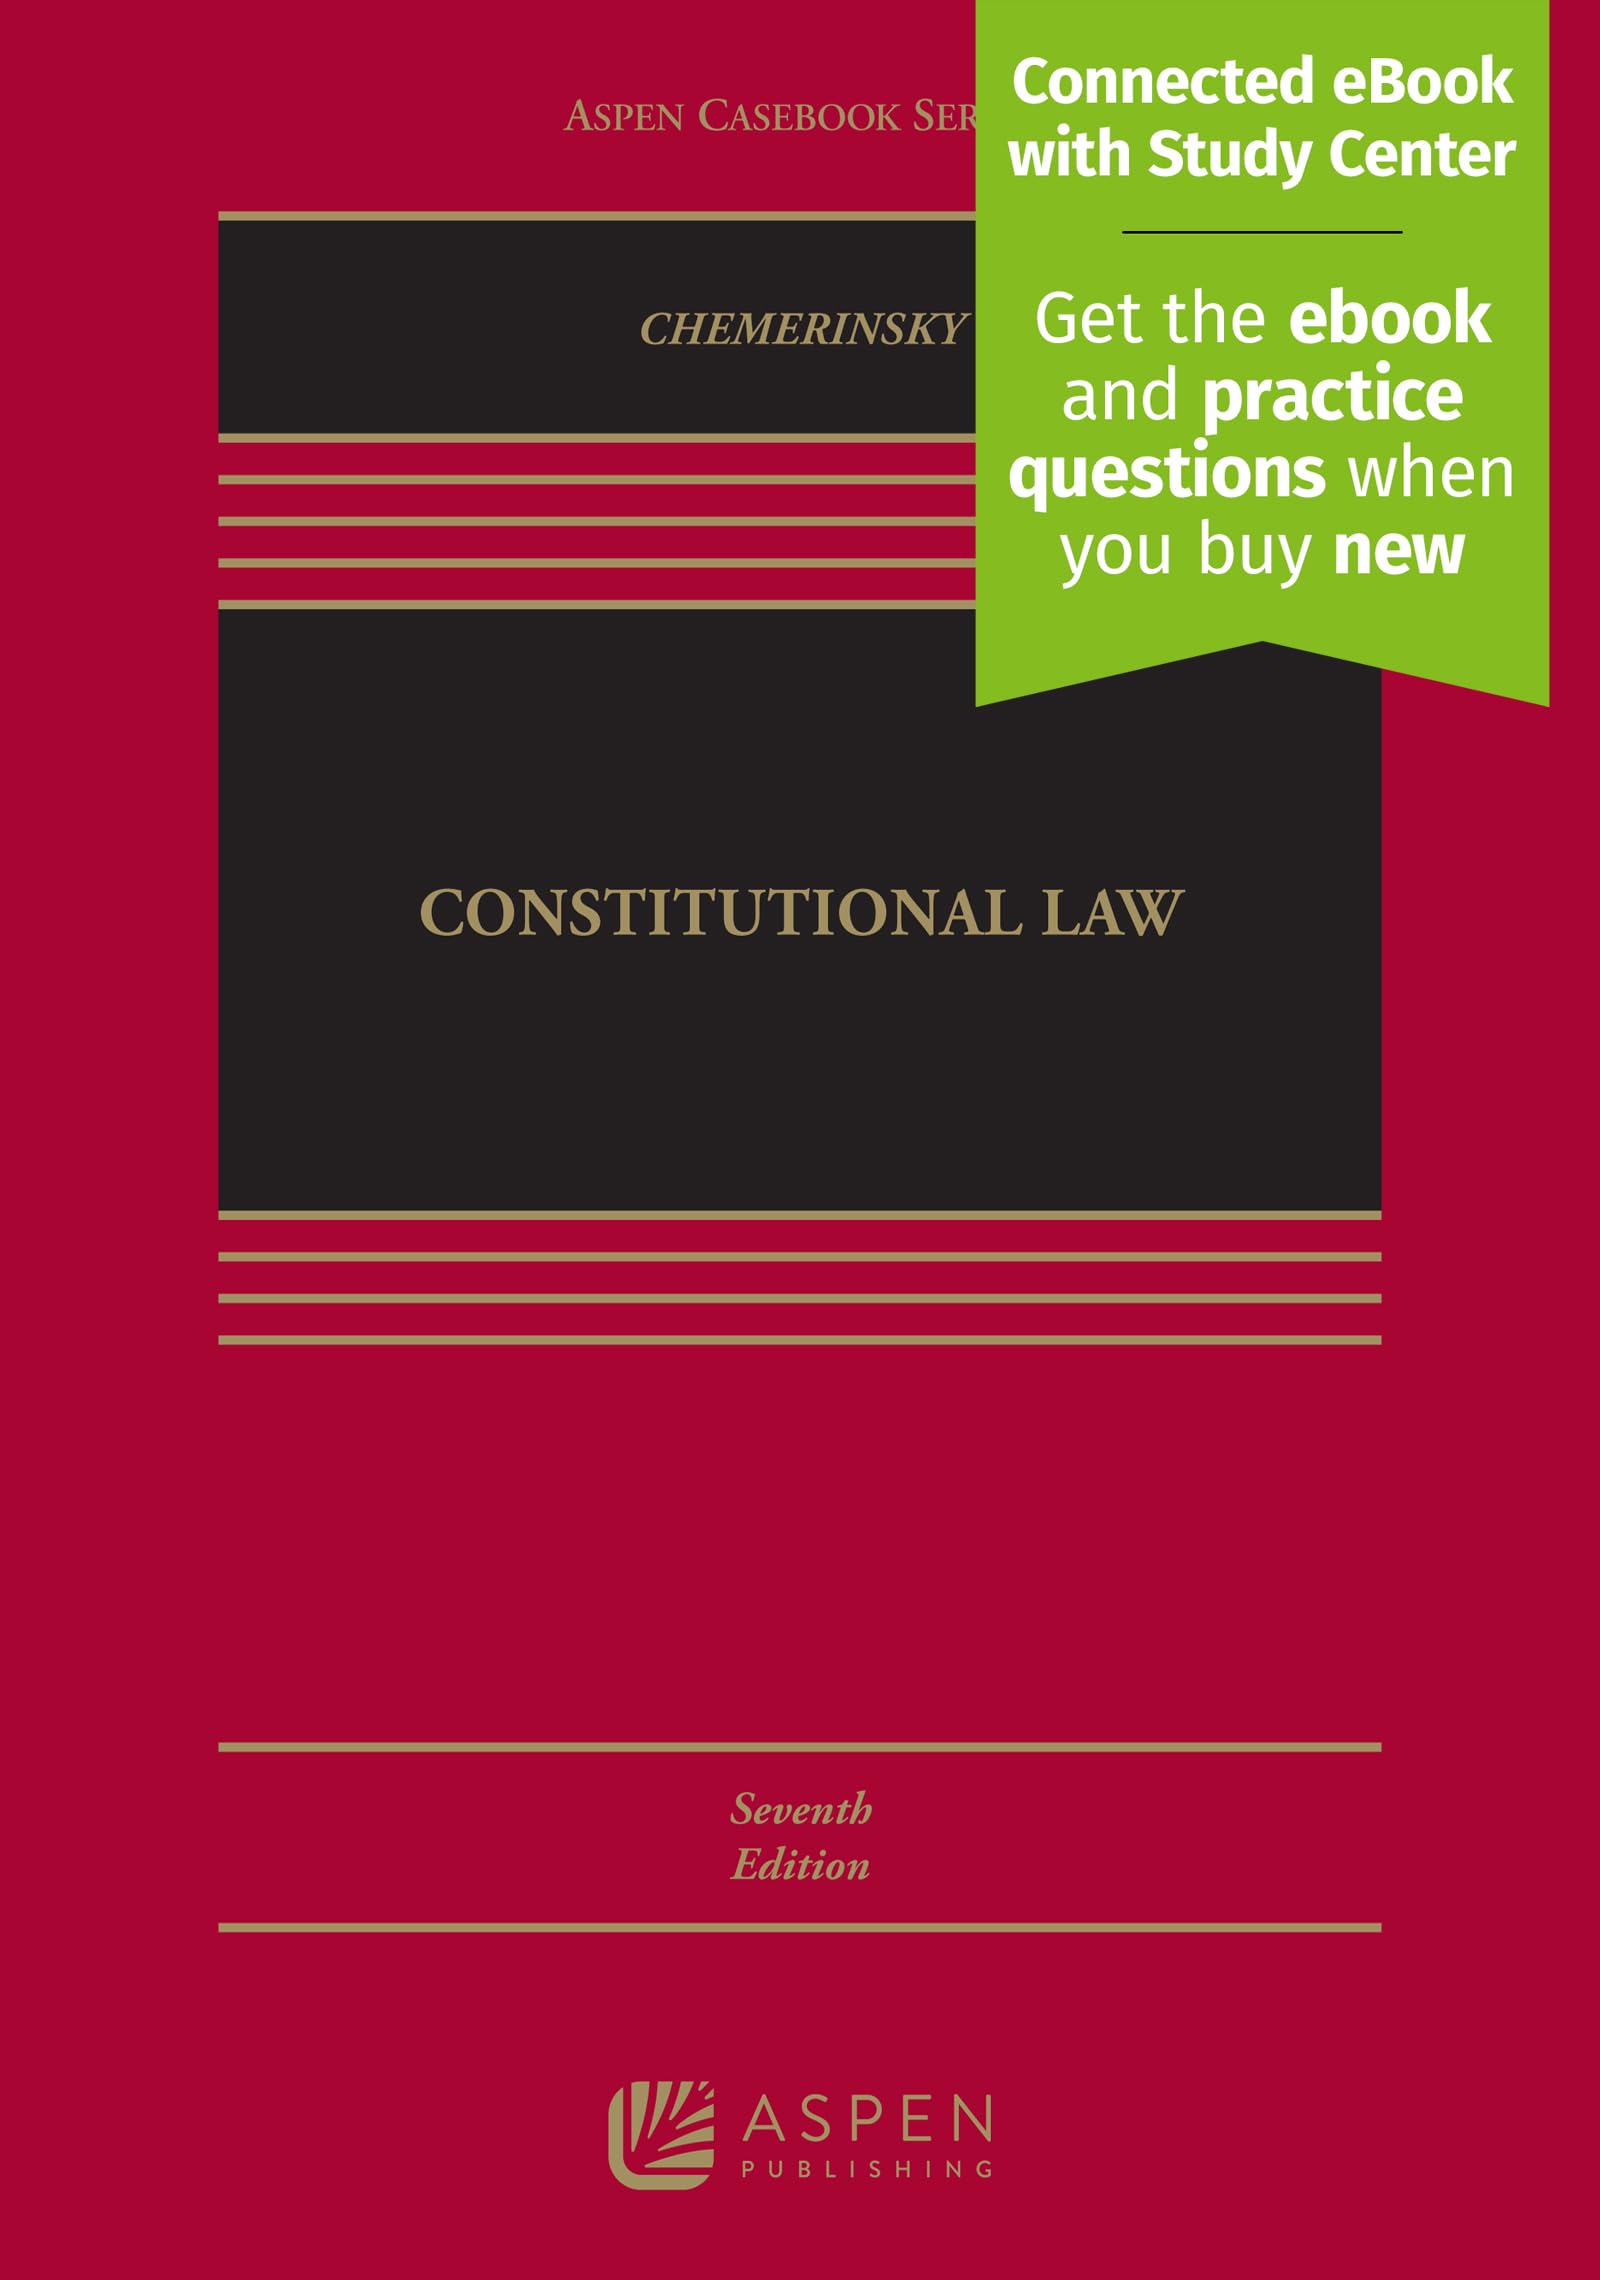 Constitutional Law: [Connected eBook with Study Center] (Aspen Casebook)